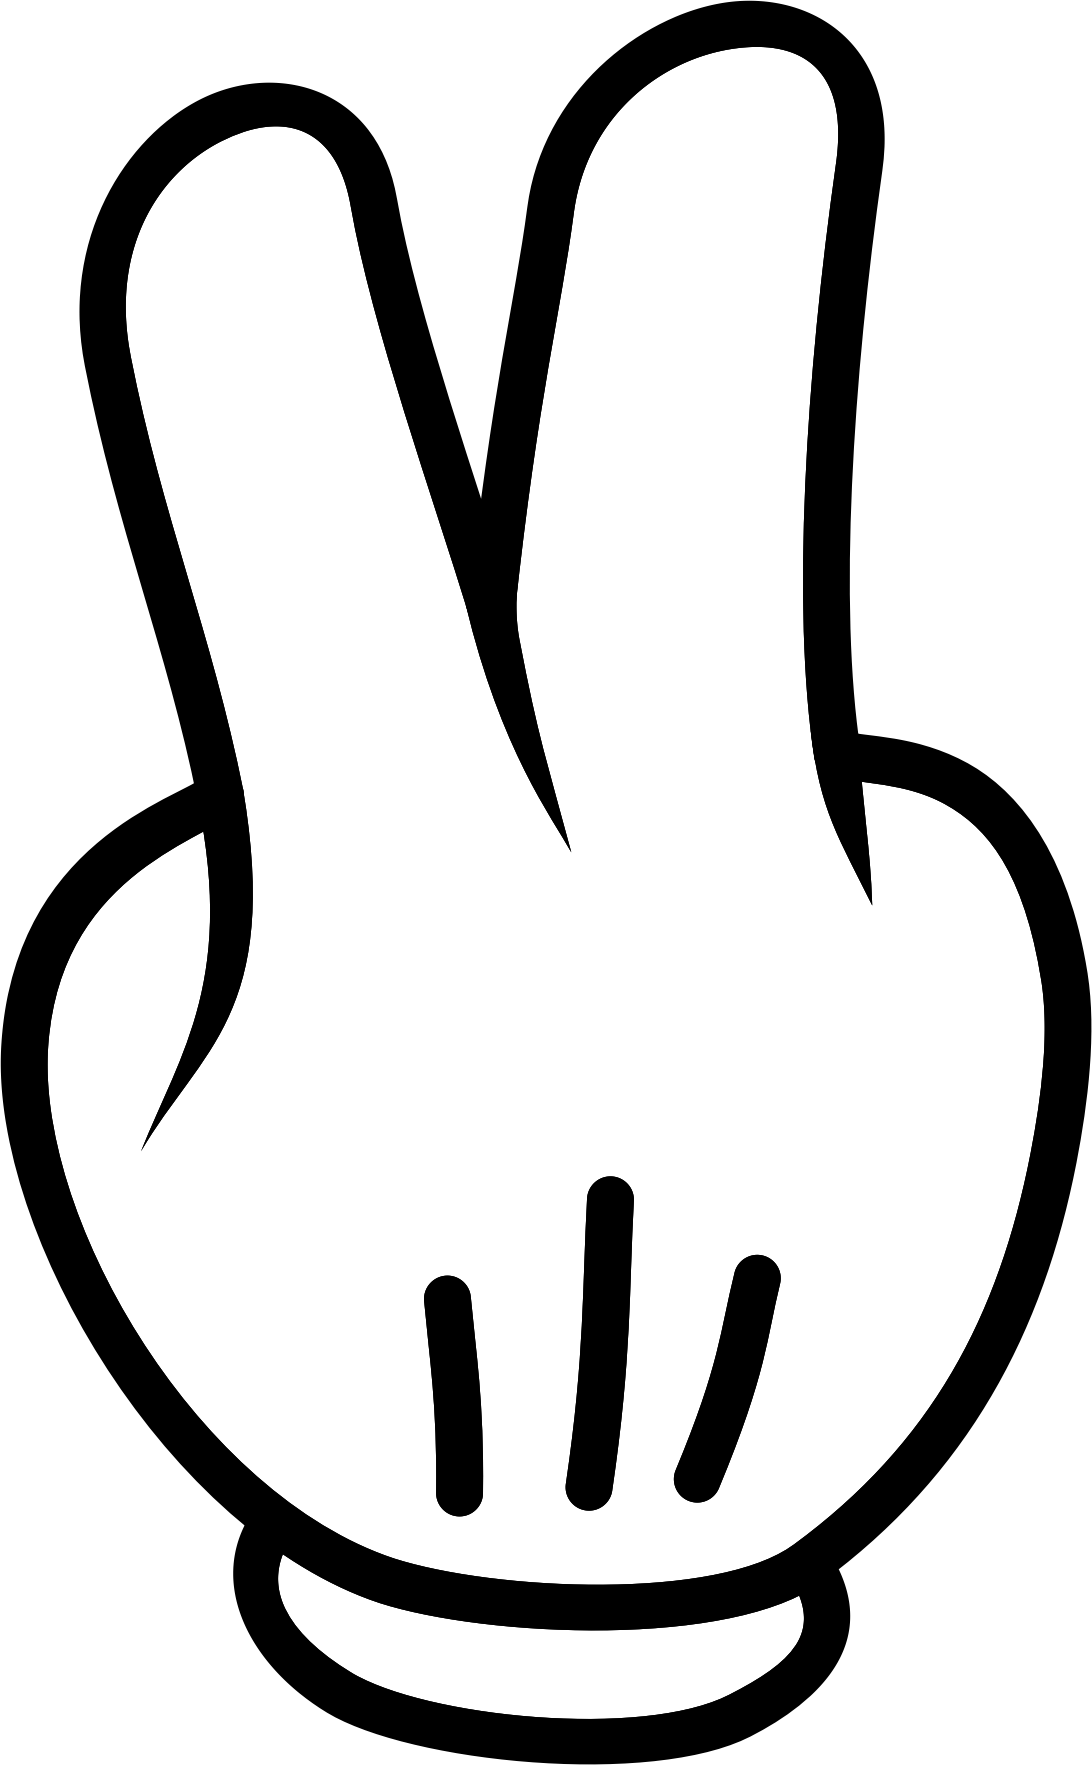 draw a middle finger